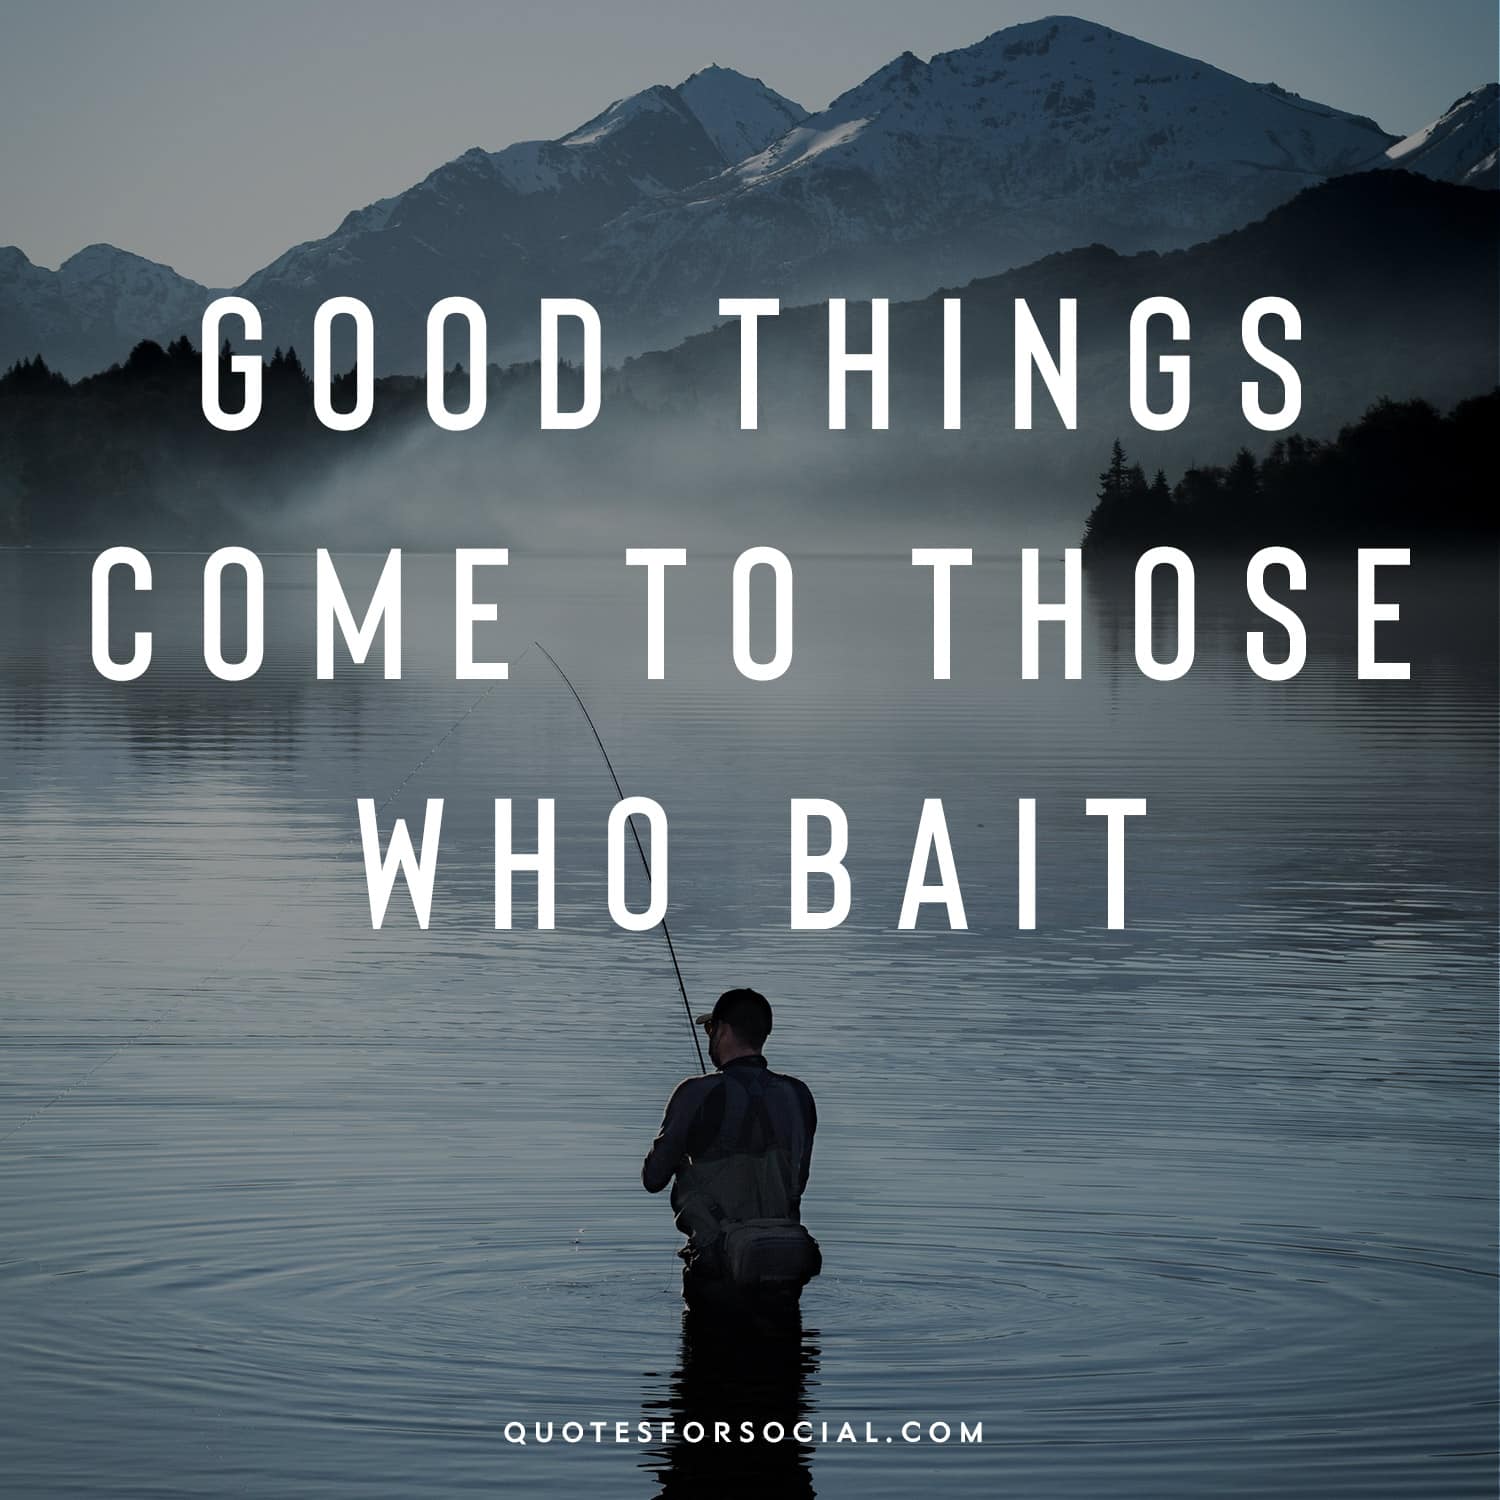 Fishing Quotes for Instagram